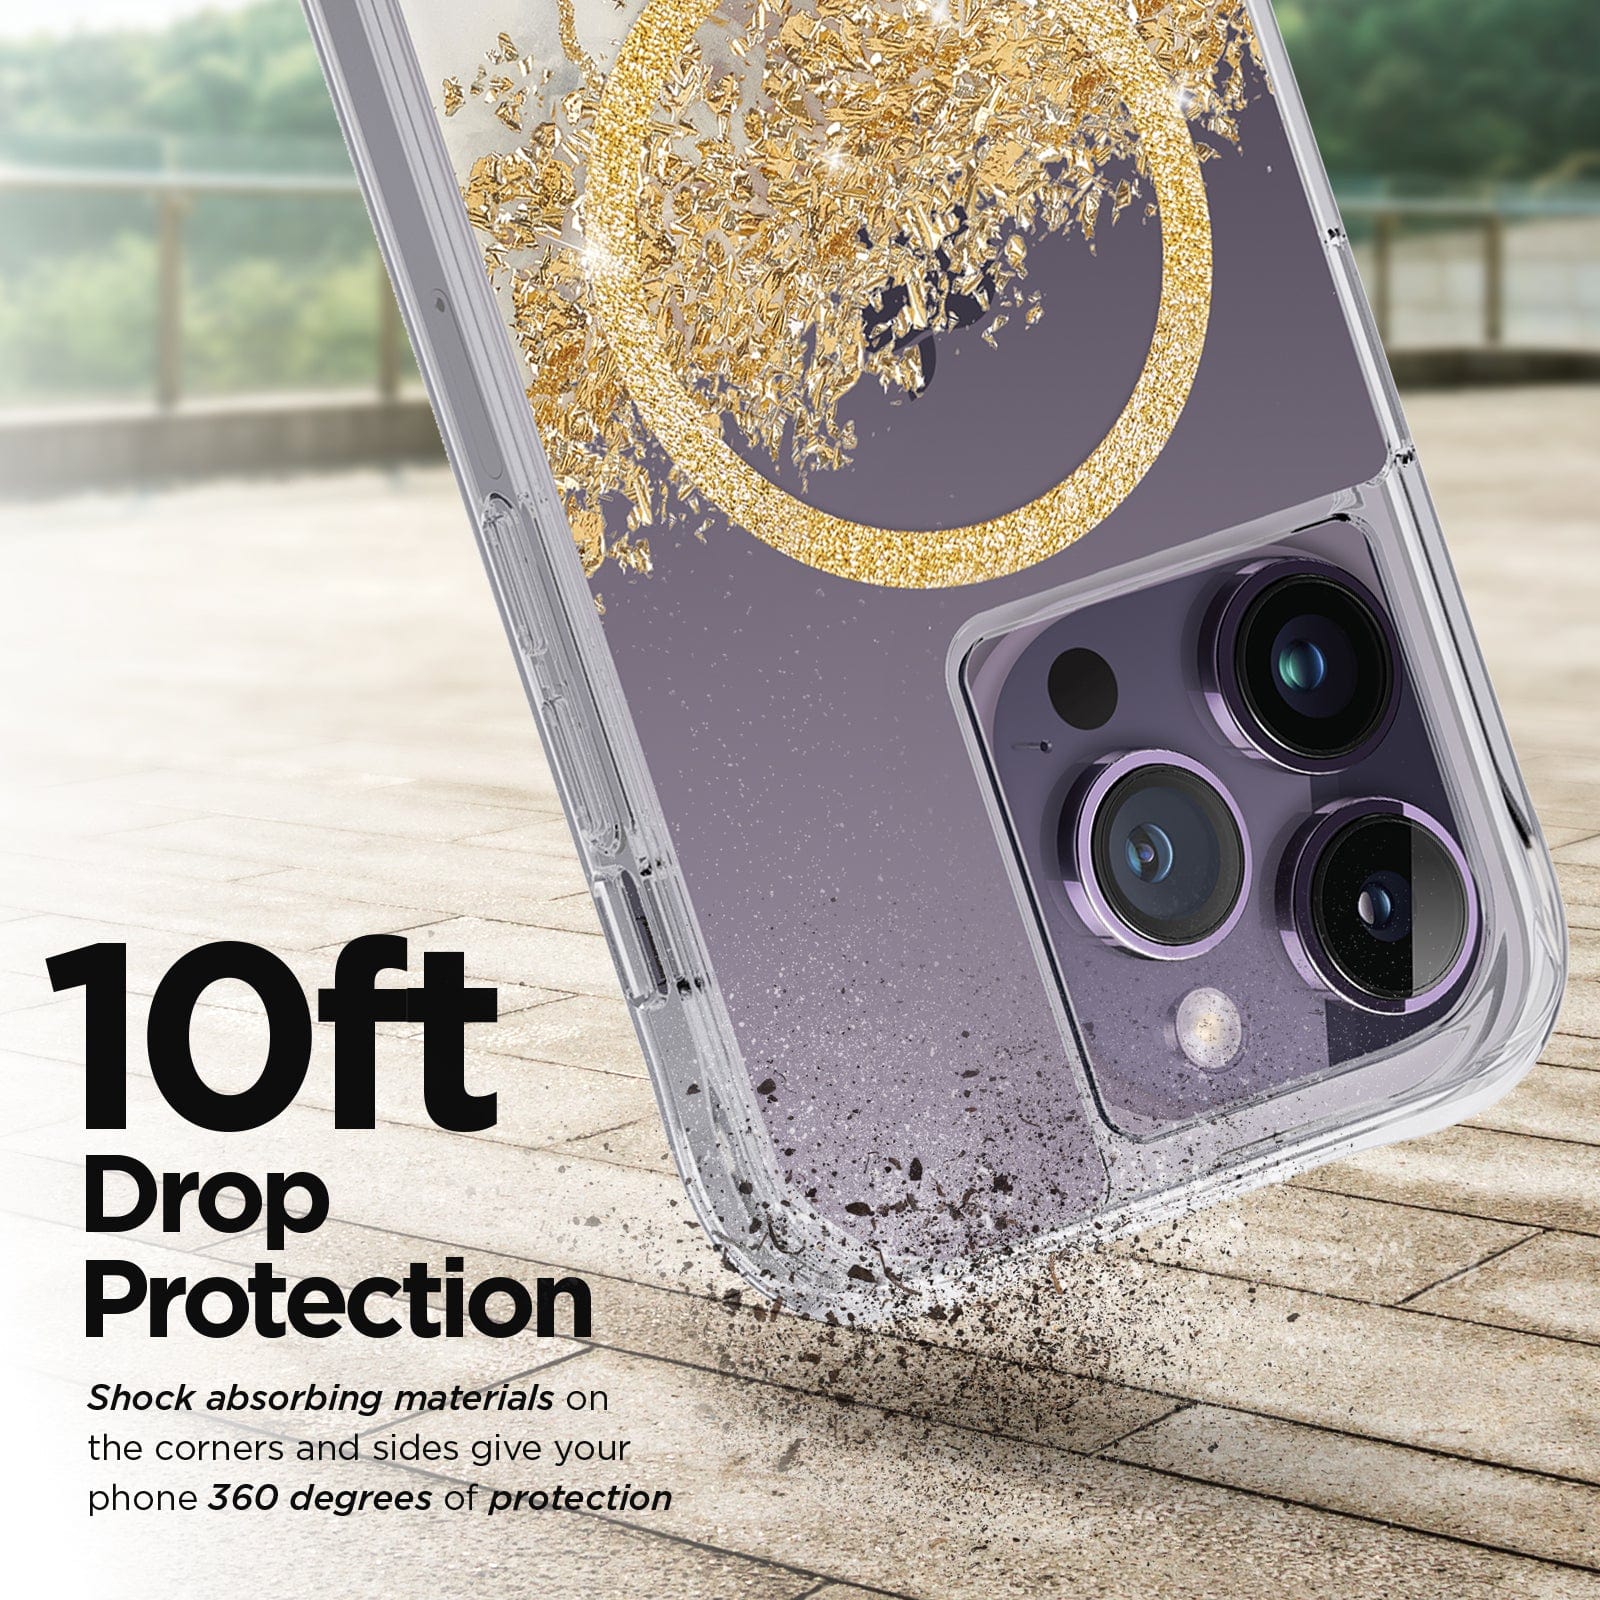 10FT DROP PROTECTION. SHOCK ABSORBING MATERIALS ONT HE CORNERS AND SIDES GIVE YOUR PHONE 360 DEGREES OF PROTECTION. 